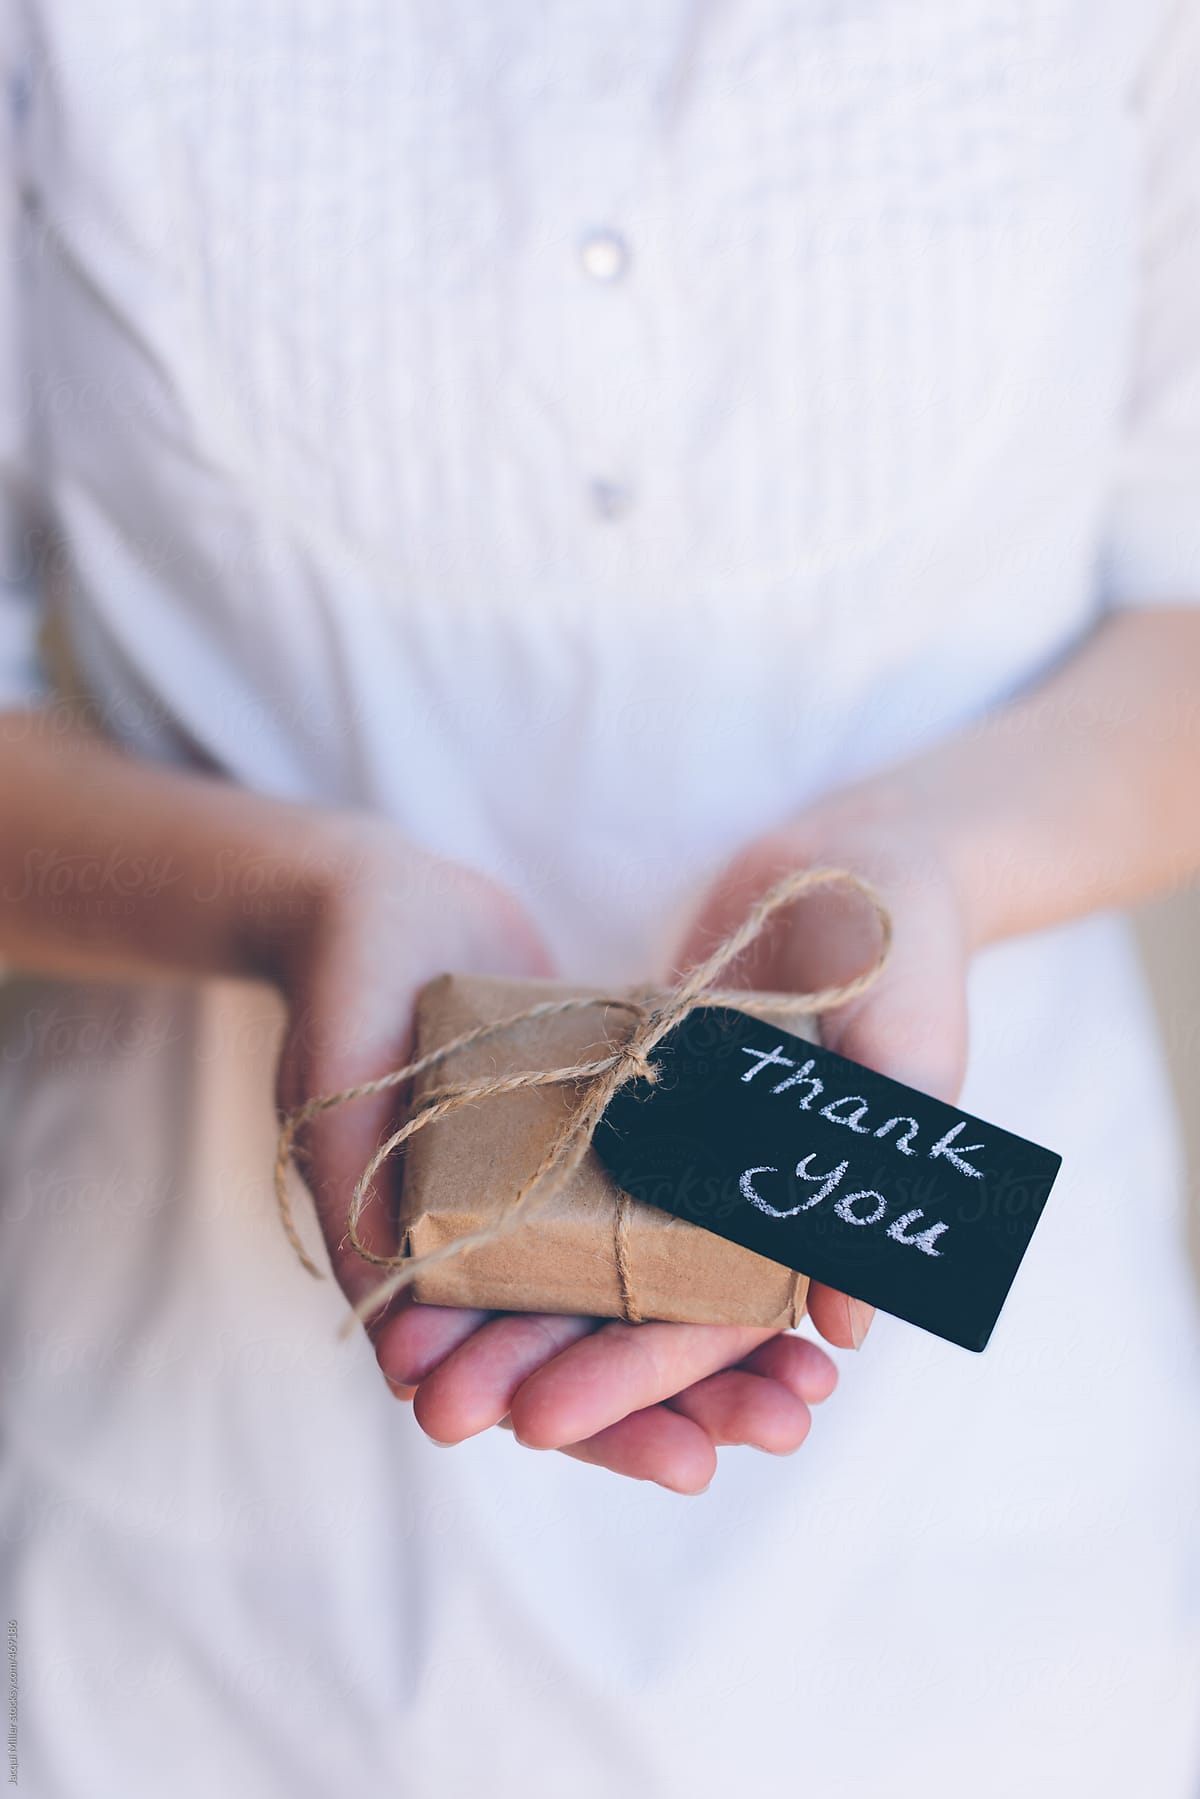 Girls hands holding a small gift with a tag that says \'thank you\'